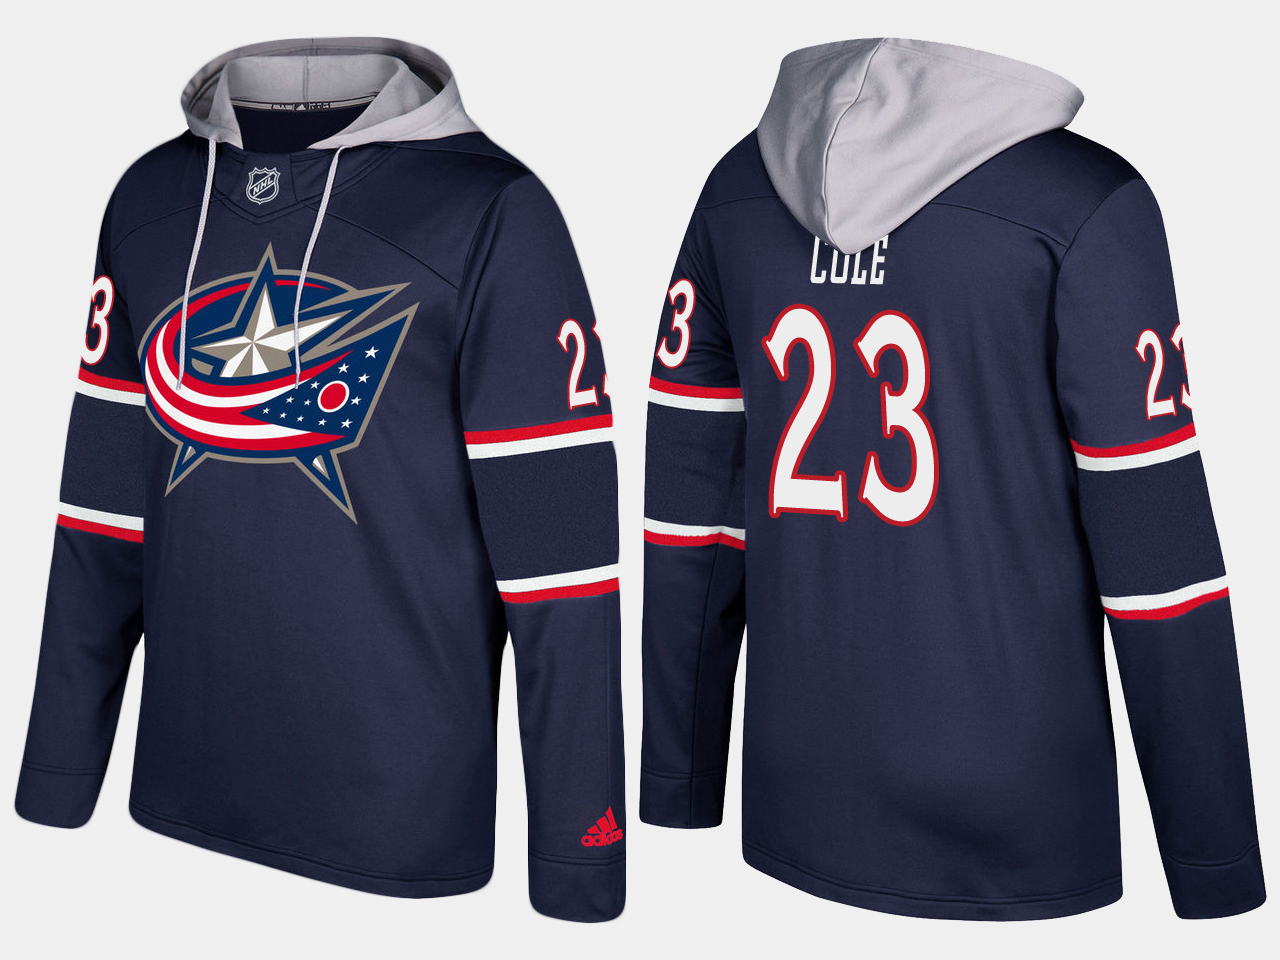 Nike Blue Jackets 23 Ian Cole Name And Number Navy Hoodie